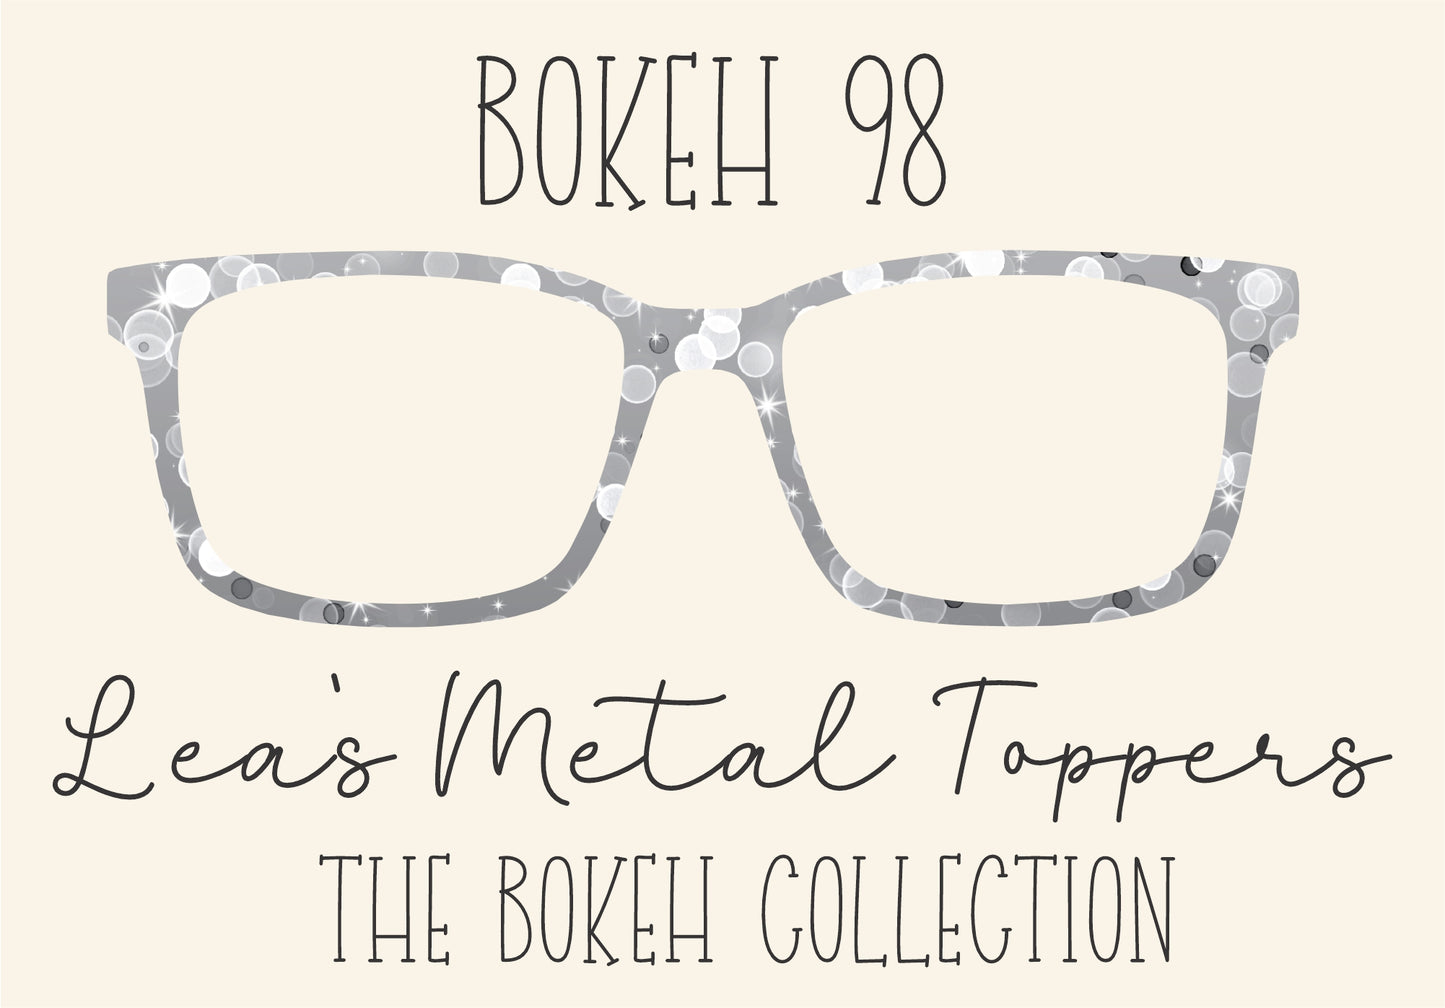 BOKEH 98 Eyewear Frame Toppers COMES WITH MAGNETS